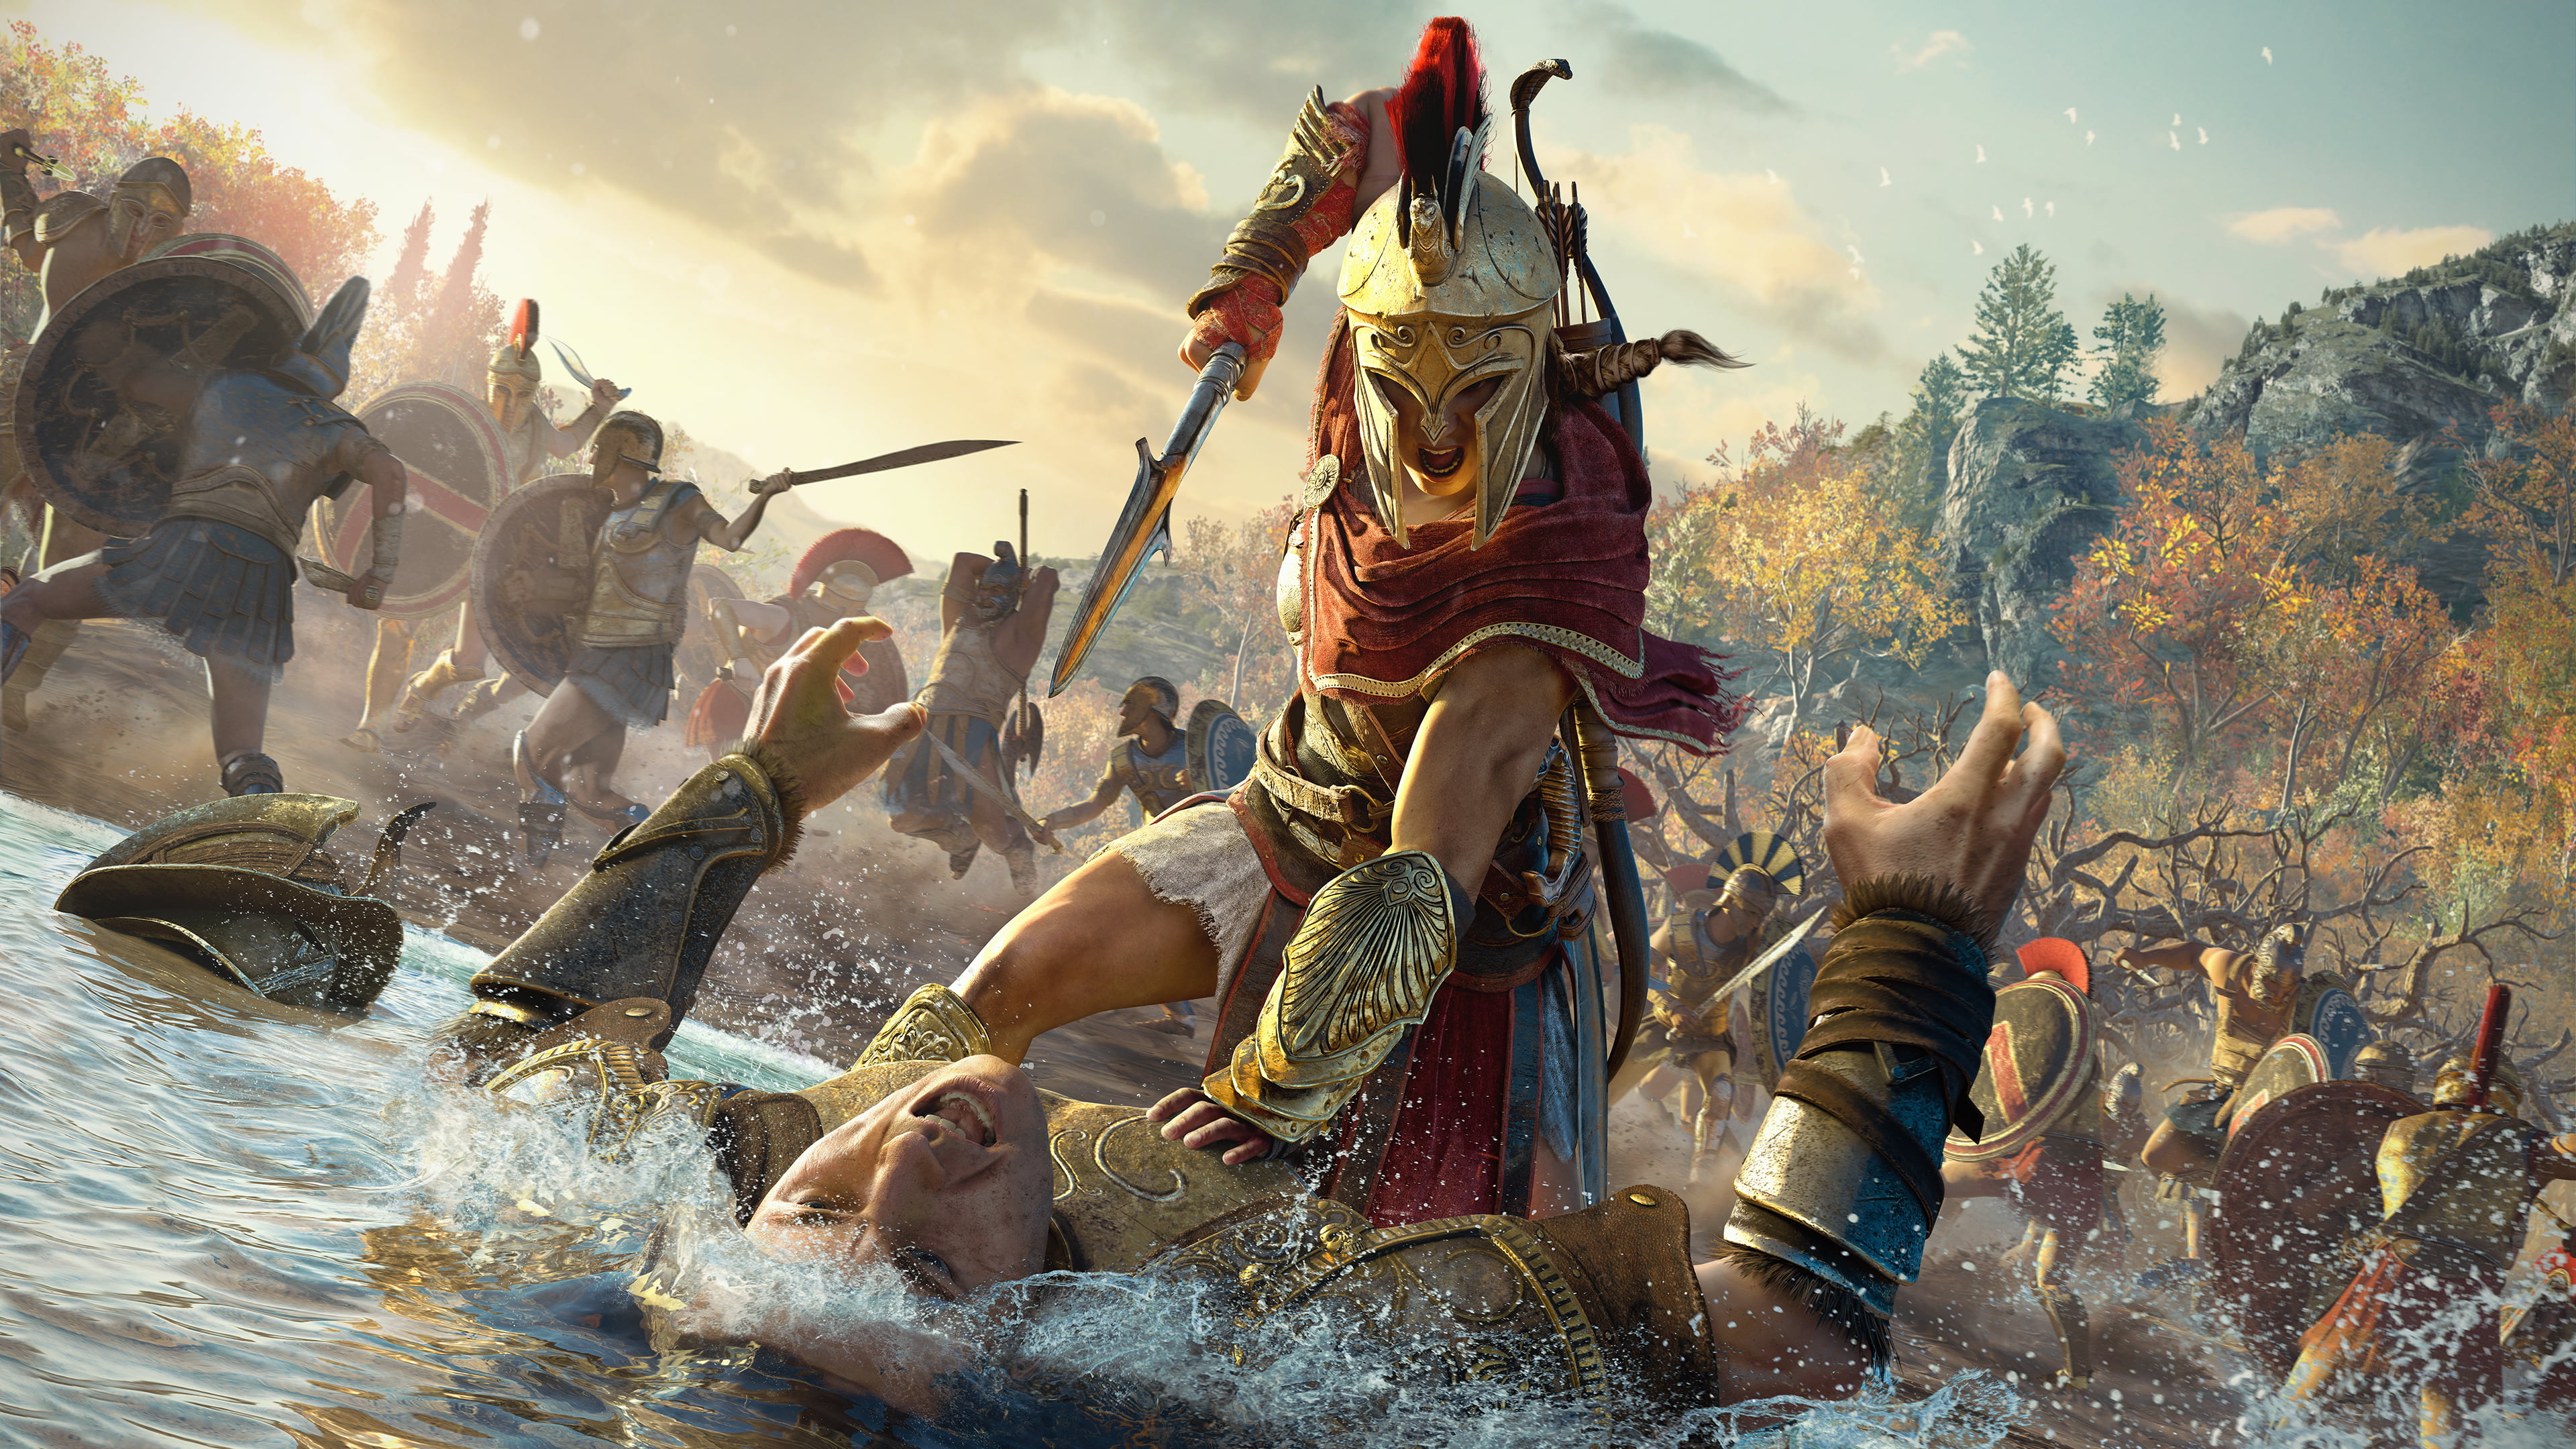 gladiator wallpaper, video games, Video Game Art, Assassin's Creed Odyssey, Assassin's Creed